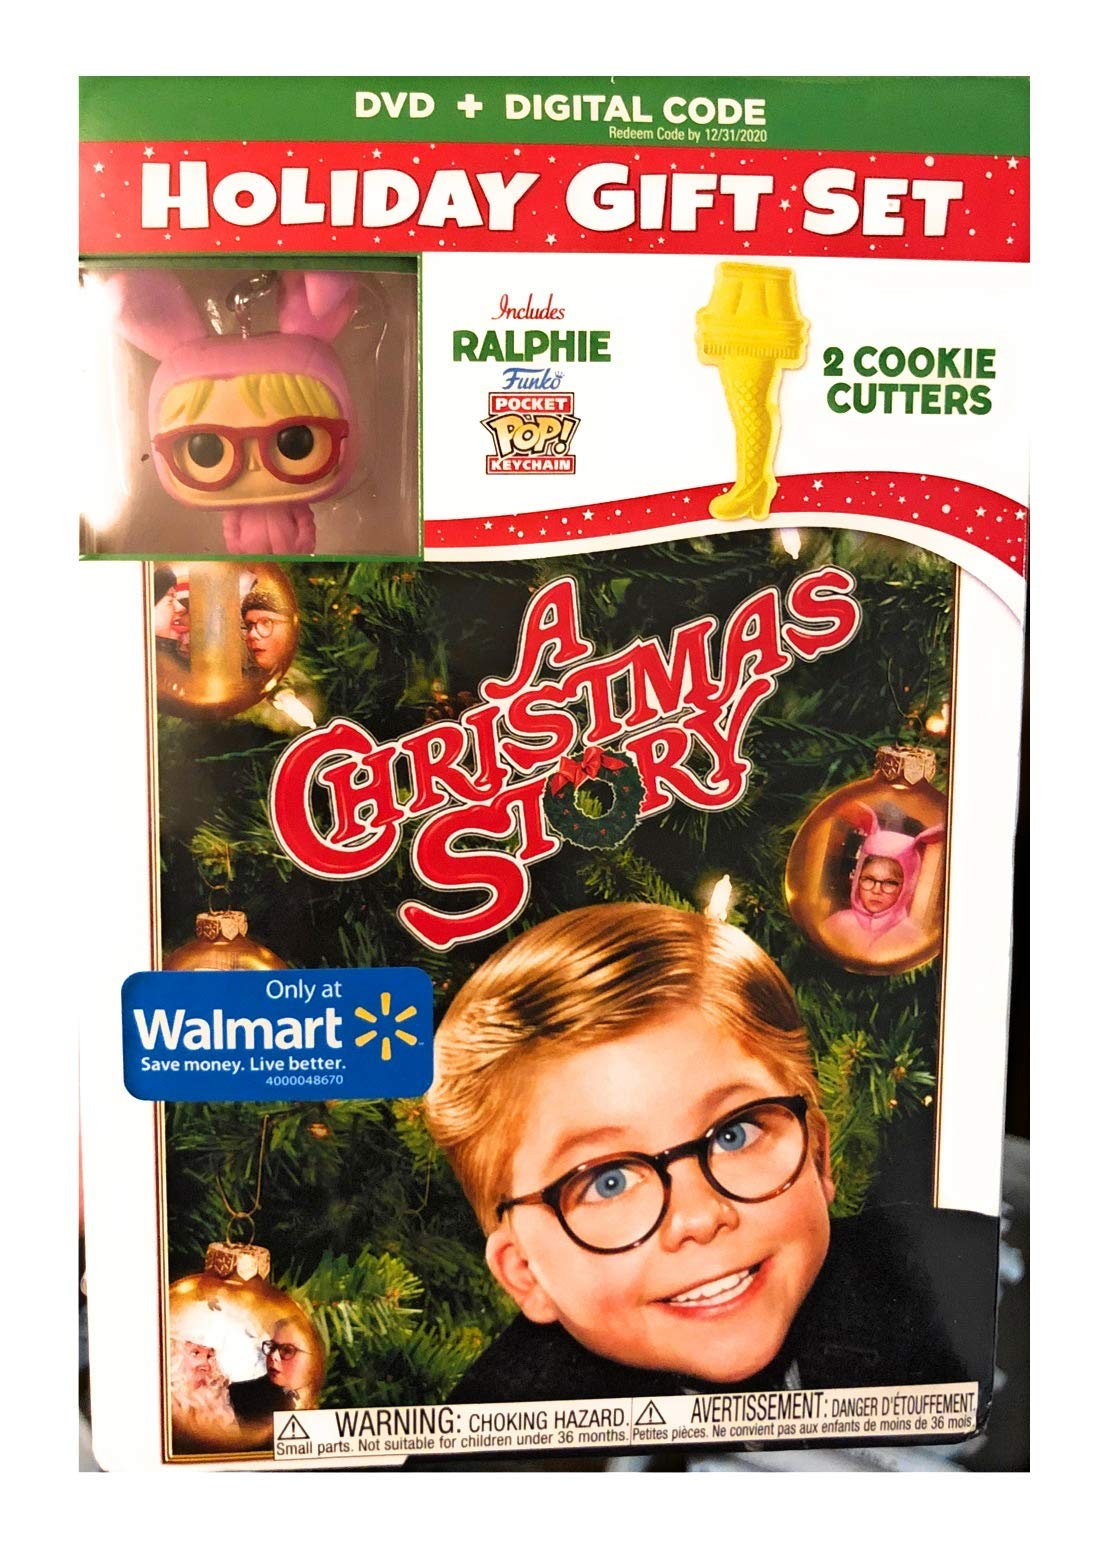 Funko Pocket POP! Keychain Bunny Suit Ralphie with DVD + Digital Code Holiday Gift Set Exclusive